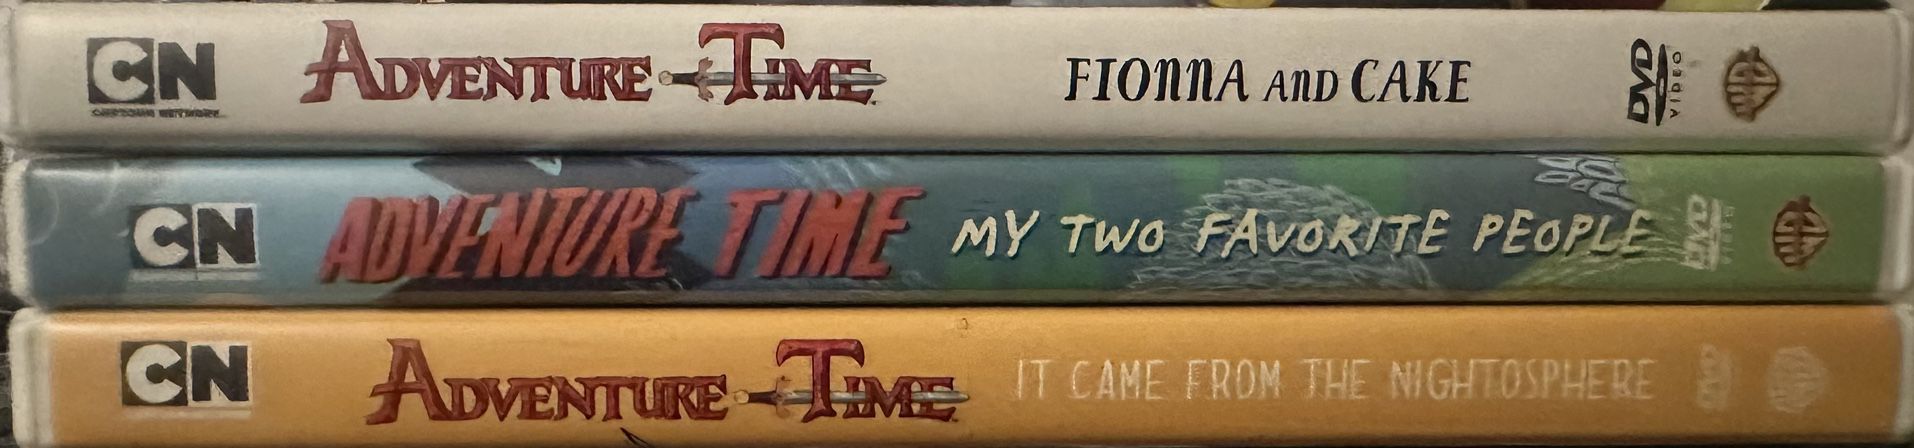 Adventure Time DVDs